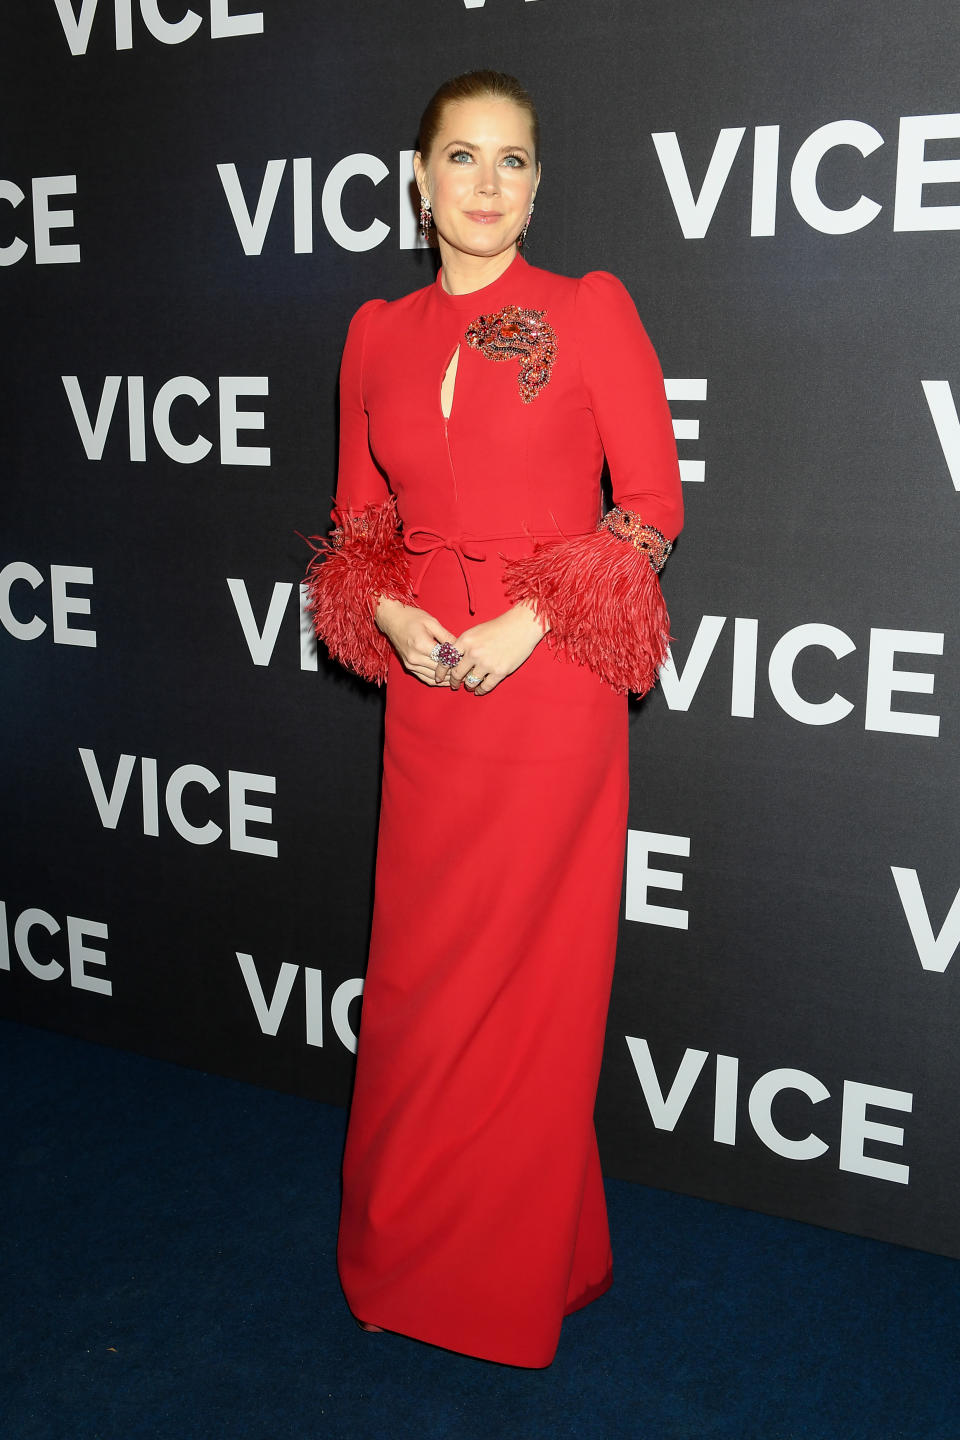 <p>Actress Amy Adams flew into Paris for the premiere of ‘Vice’ and graced the red carpet in a bold gown by Andrew Gn. <em>[Photo: Getty]</em> </p>